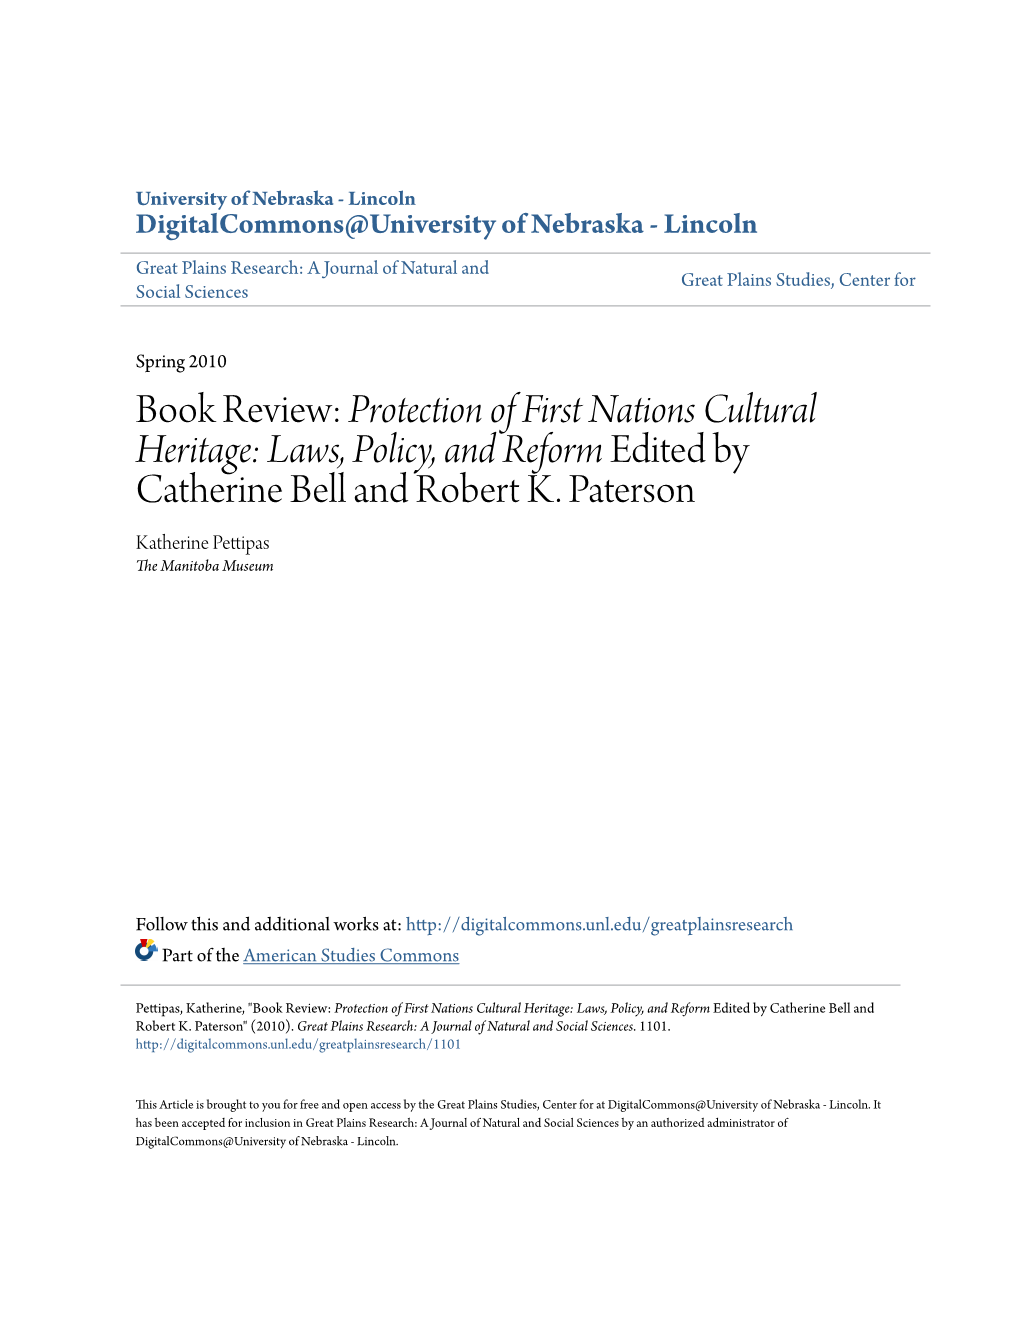 Book Review: Protection of First Nations Cultural Heritage: Laws, Policy, and Reform Edited by Catherine Bell and Robert K